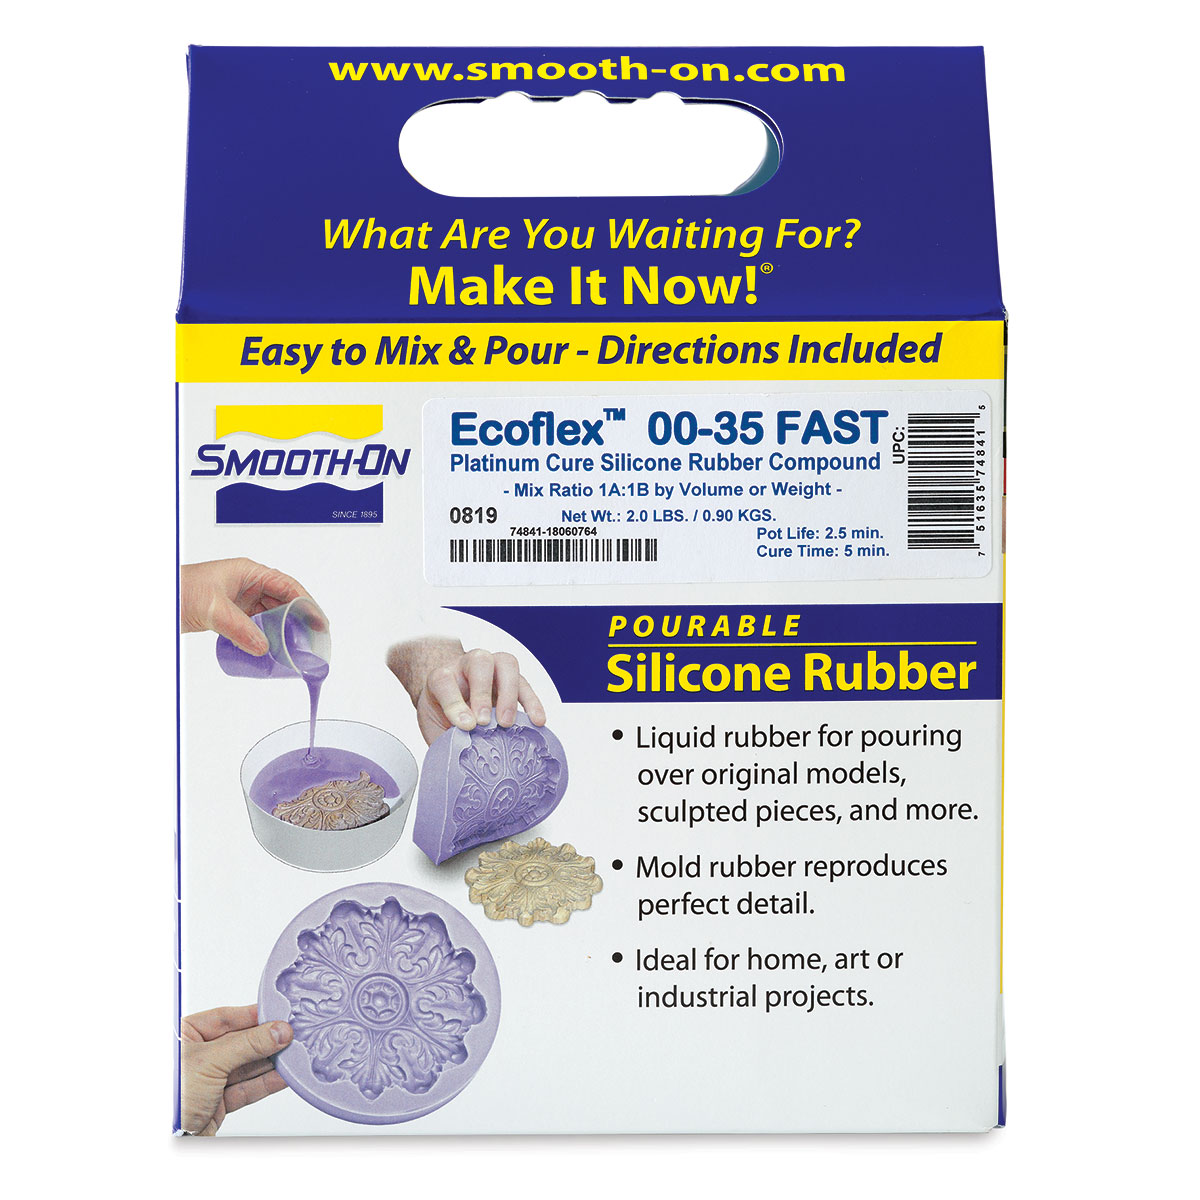  Smooth-On ECOFLEX 00-35 Fast Platinum Cure Silicone